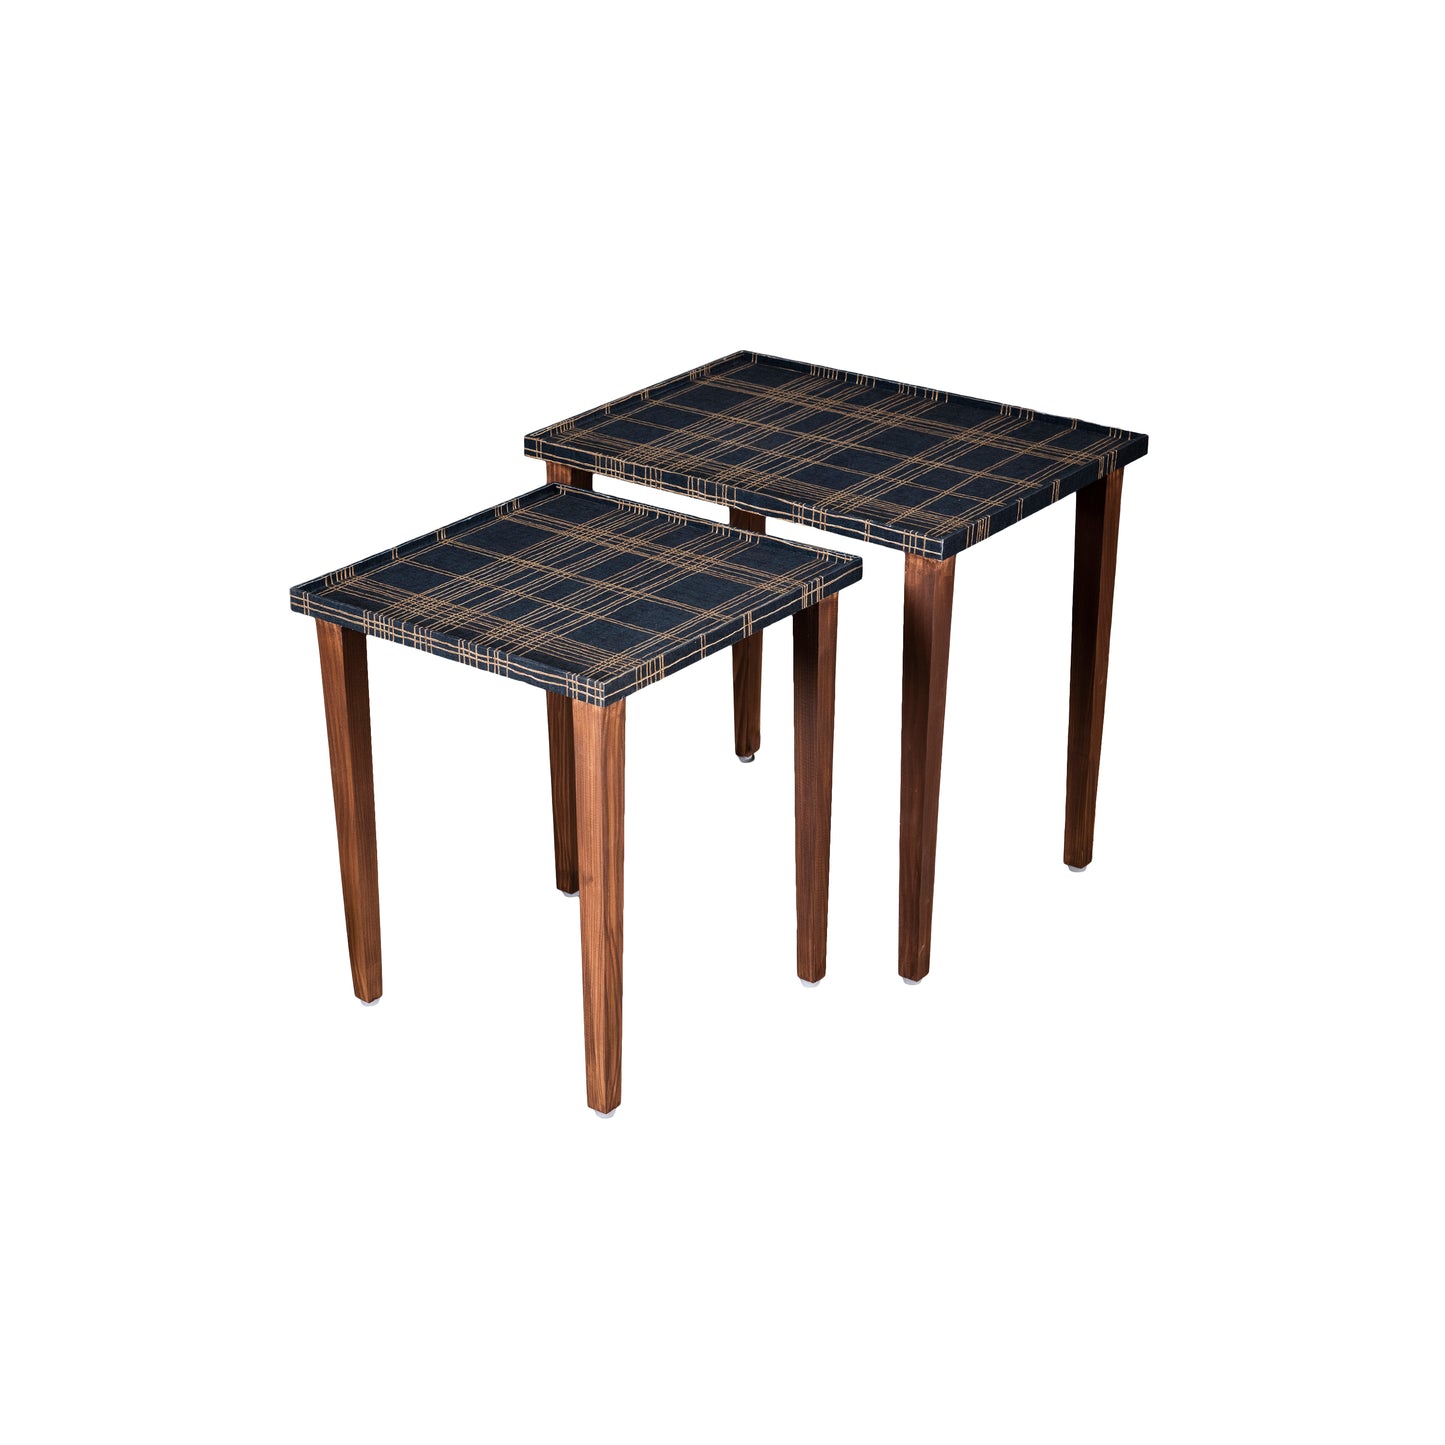 A Tiny Mistake Tesseract Wooden Rectangle Nesting Tables (Set of 2), Living Room Decor